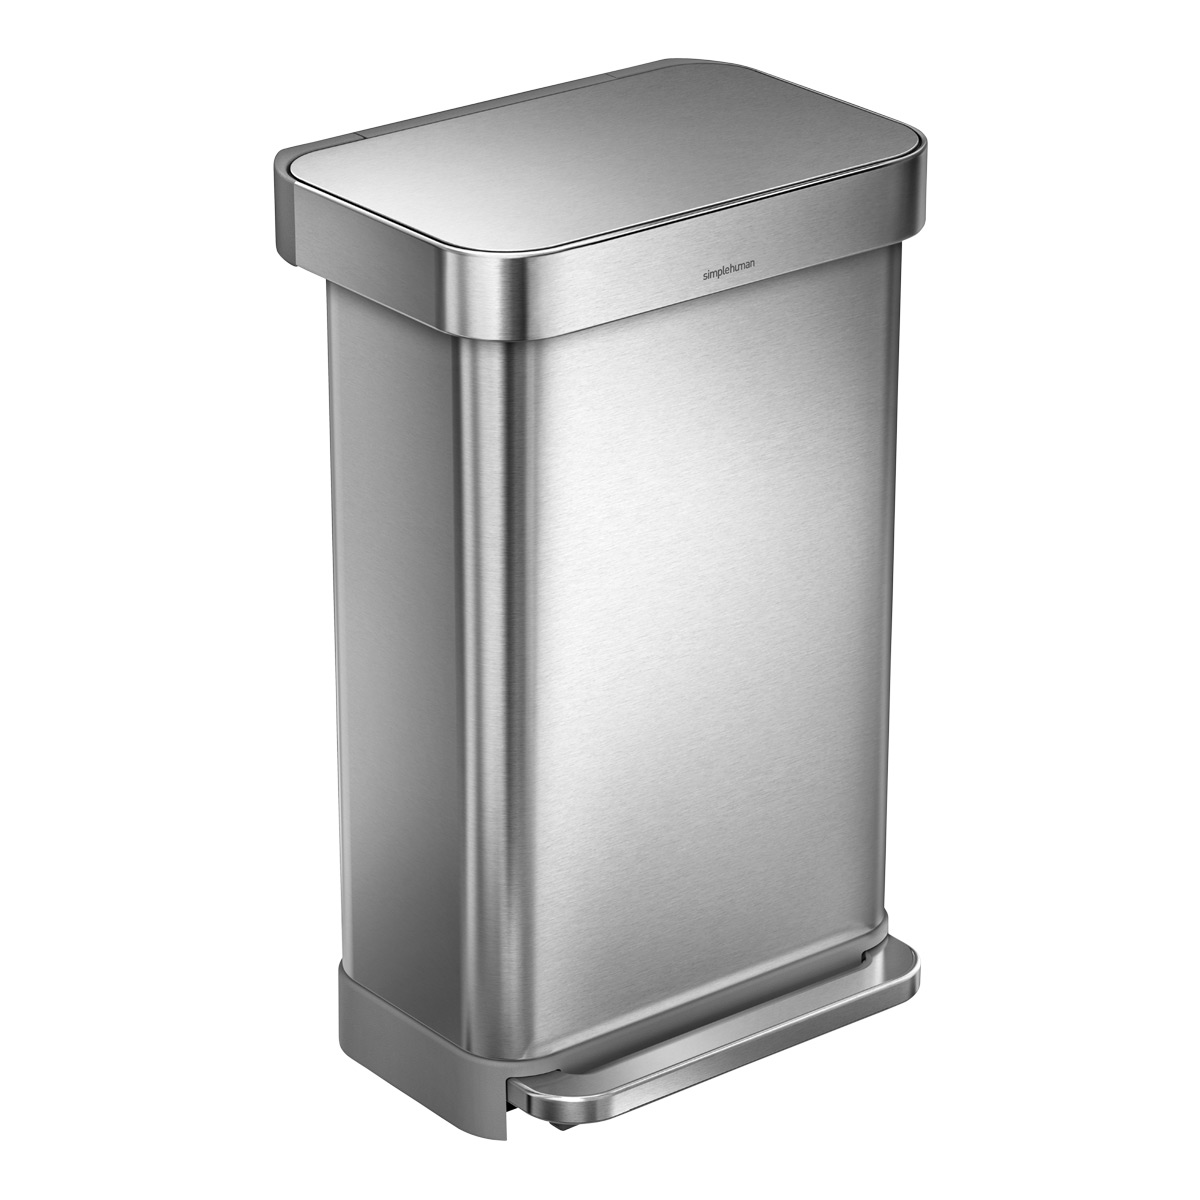 https://www.containerstore.com/catalogimages/378627/10066827-Simplehuman-12Gal-Trash-VEN.jpg